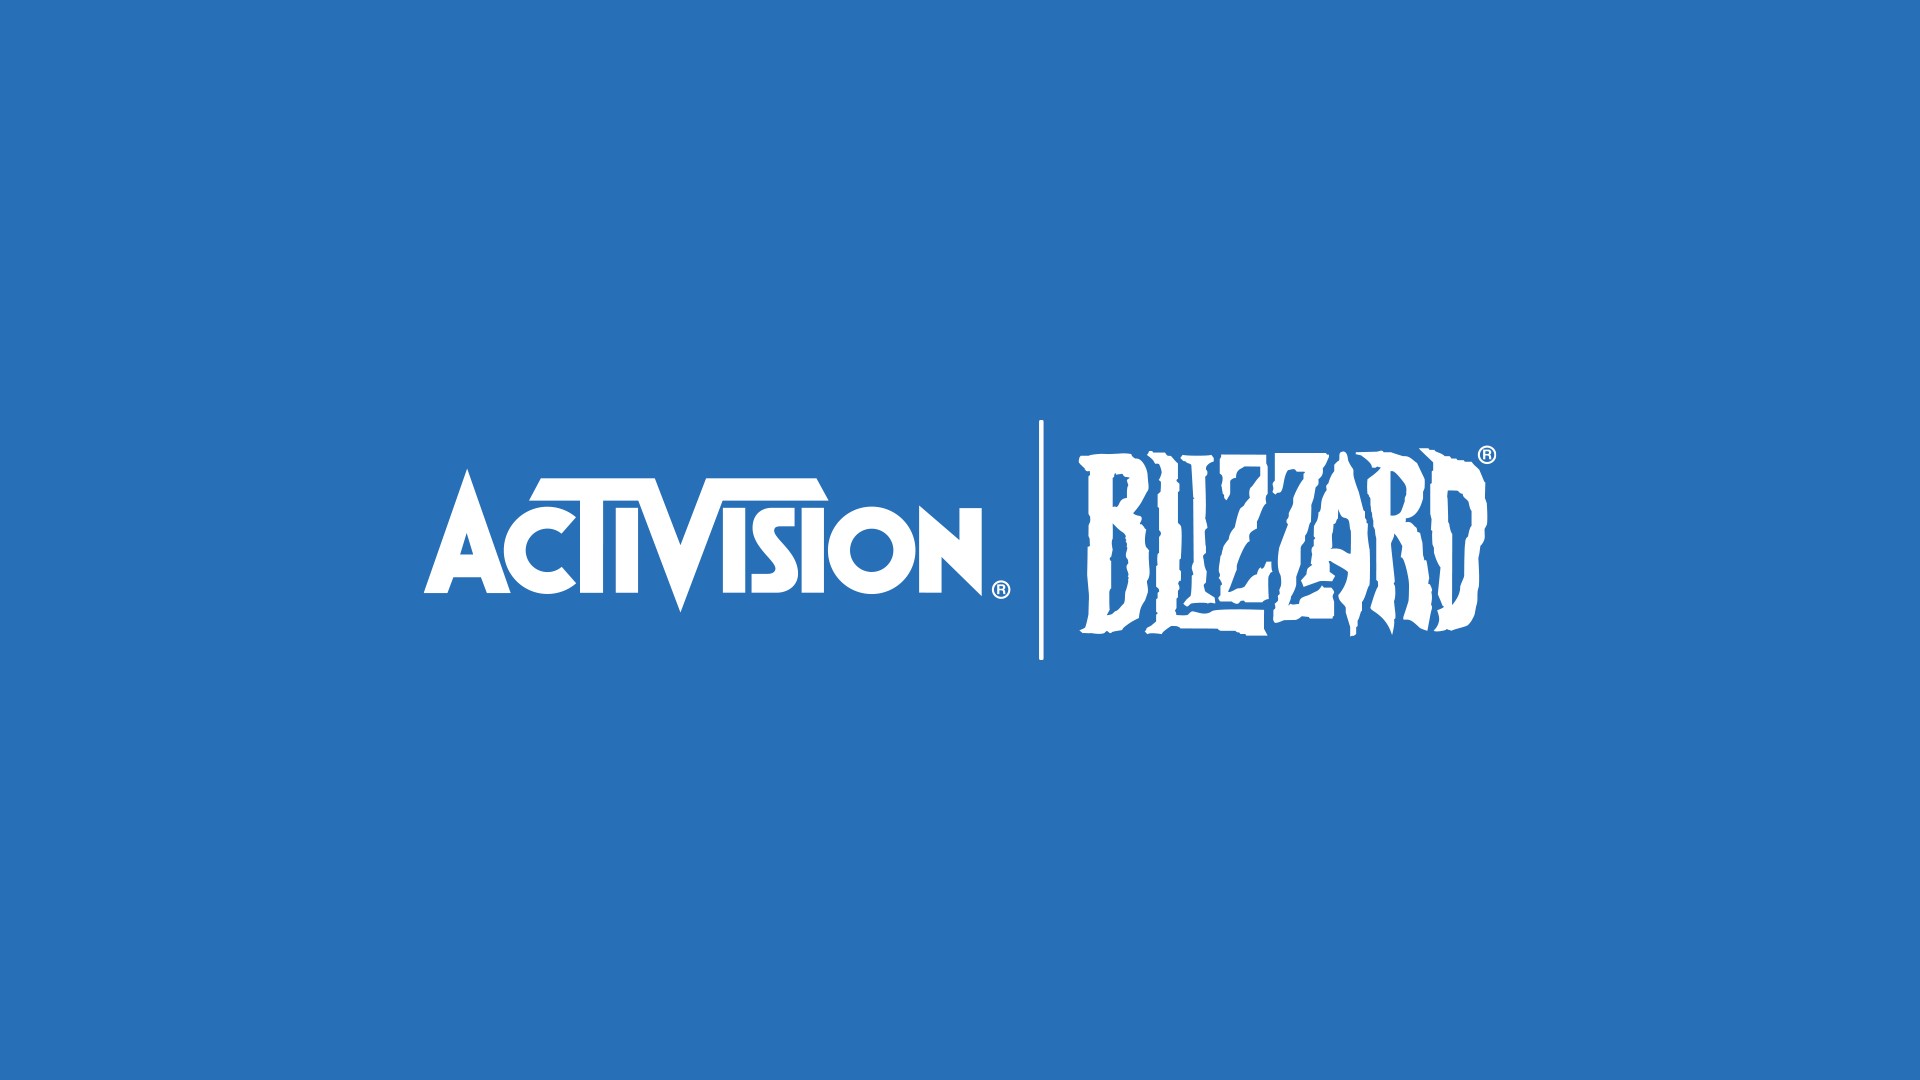 The Activision Blizzard lawsuit and its aftermath explained